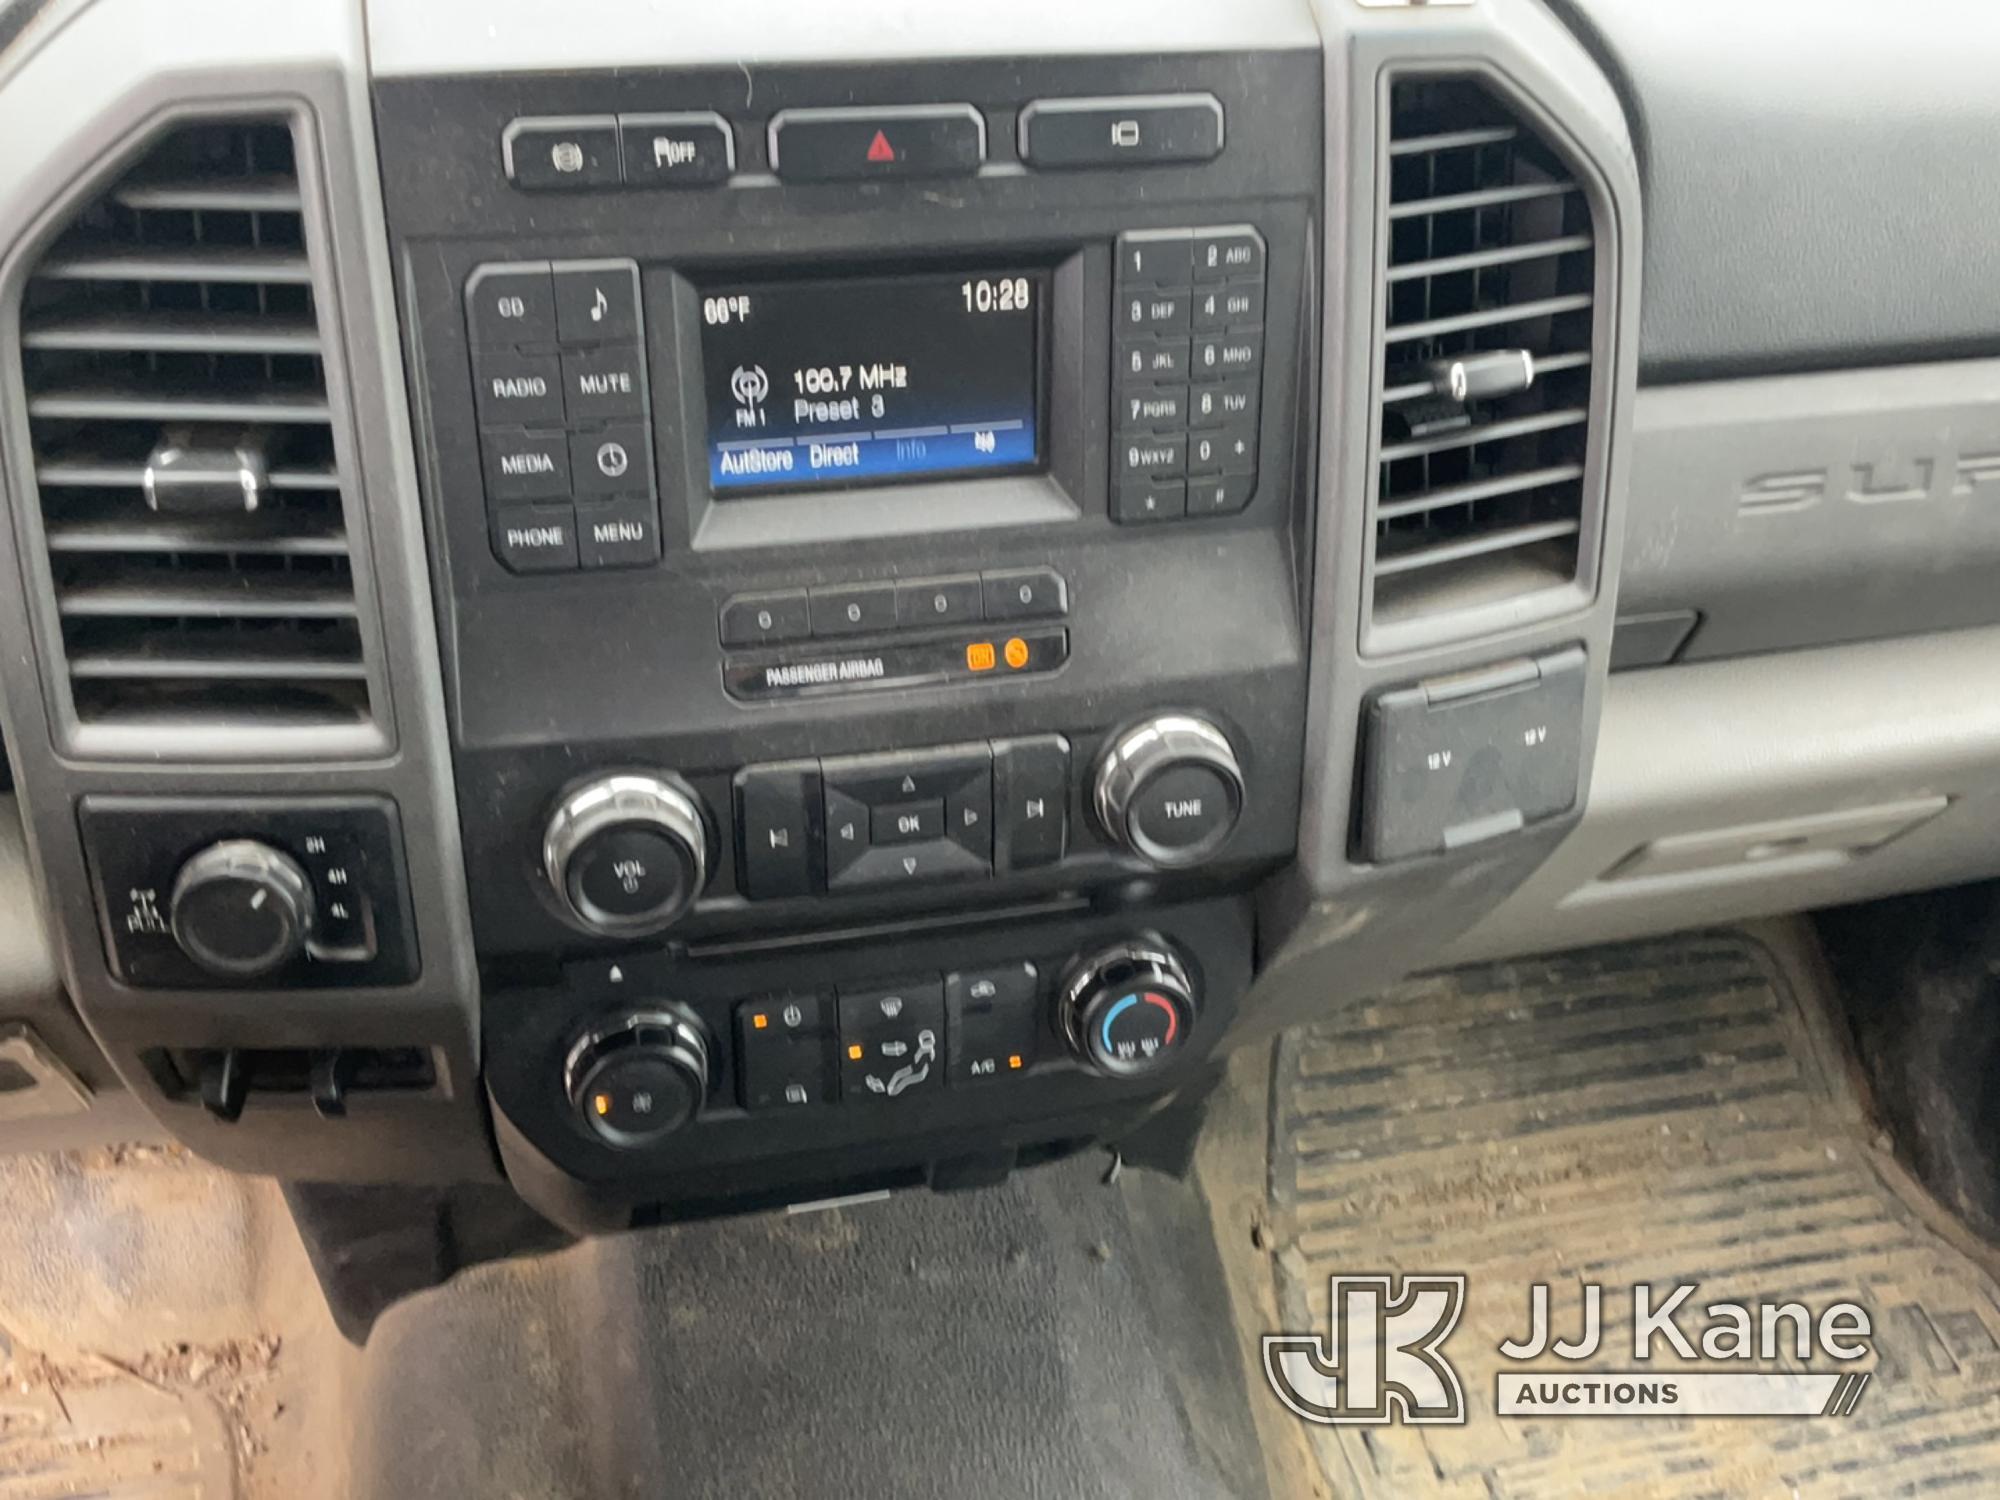 (Verona, KY) 2018 Ford F250 4x4 Crew-Cab Pickup Truck Runs & Moves) (Check Engine Light On, Exhaust